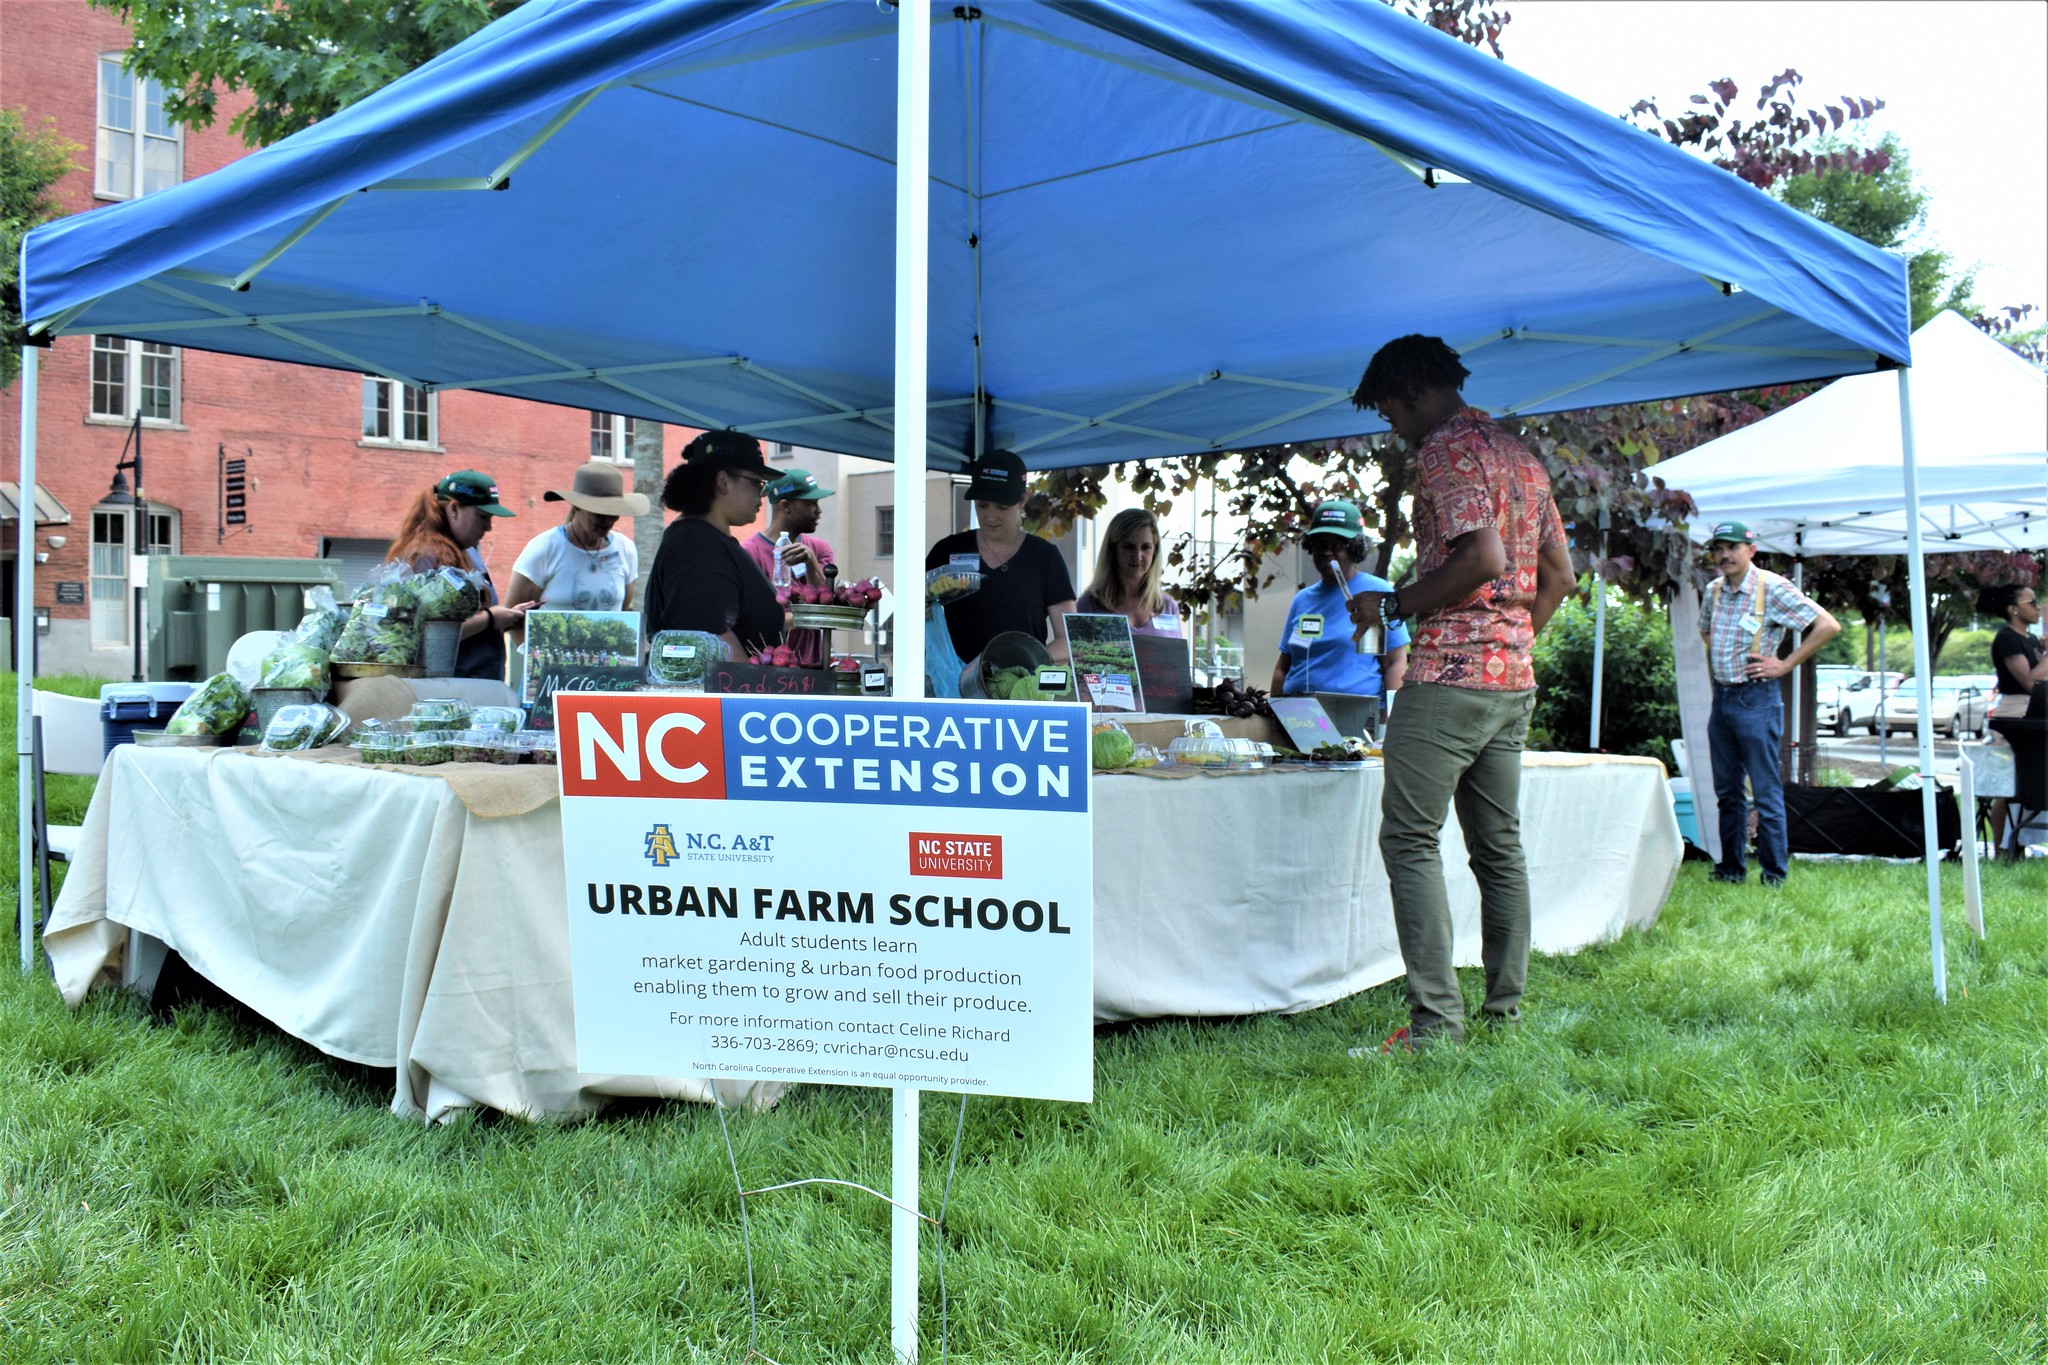 A young man inspects the Urban Farm School tent.